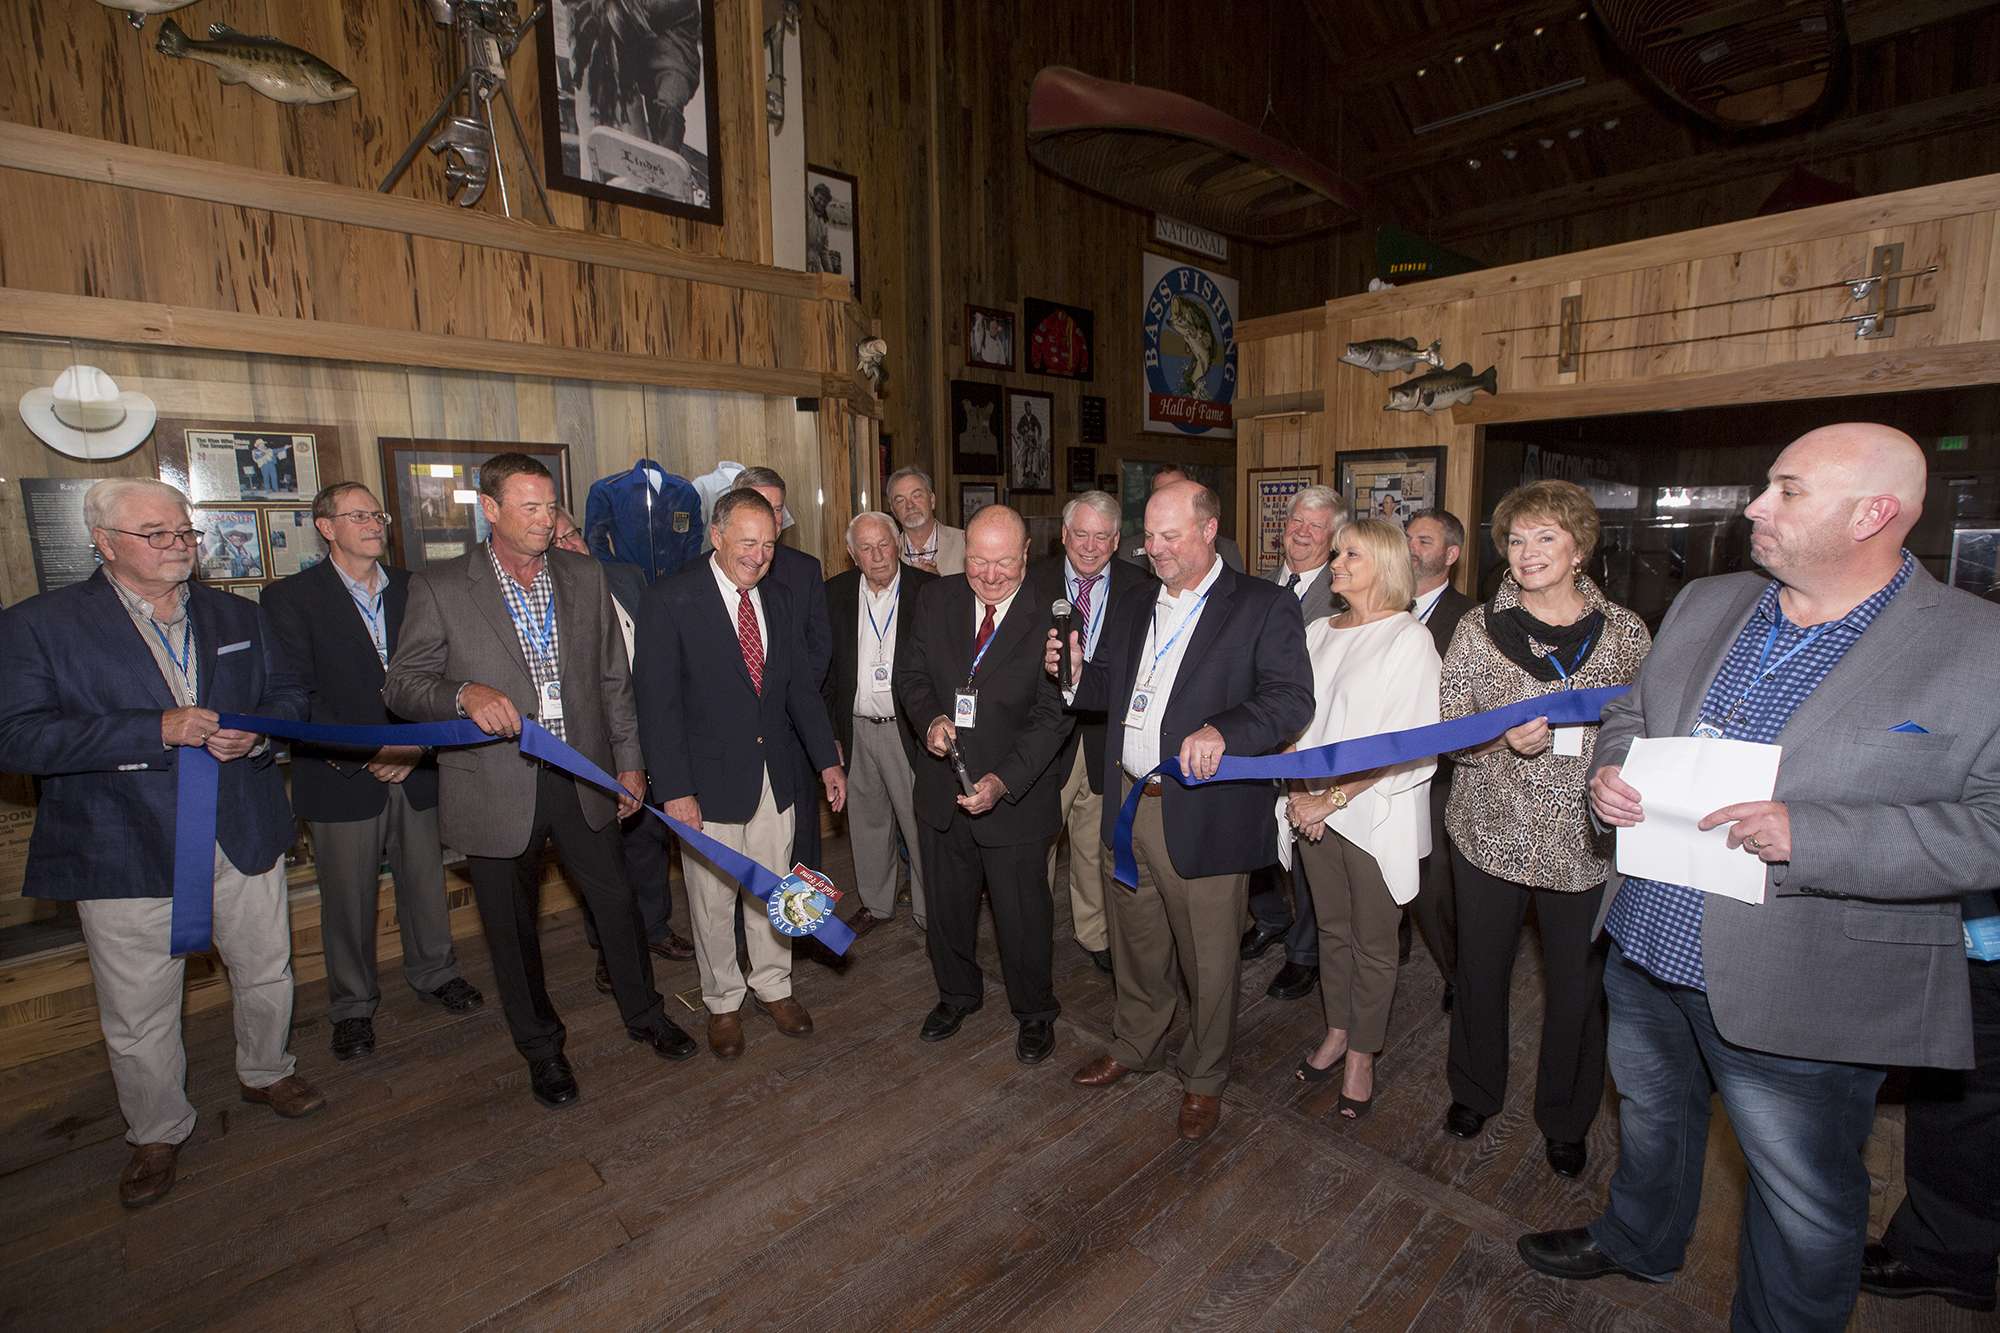 Bass Fishing Hall of Fame celebrates grand opening, inducts 2017